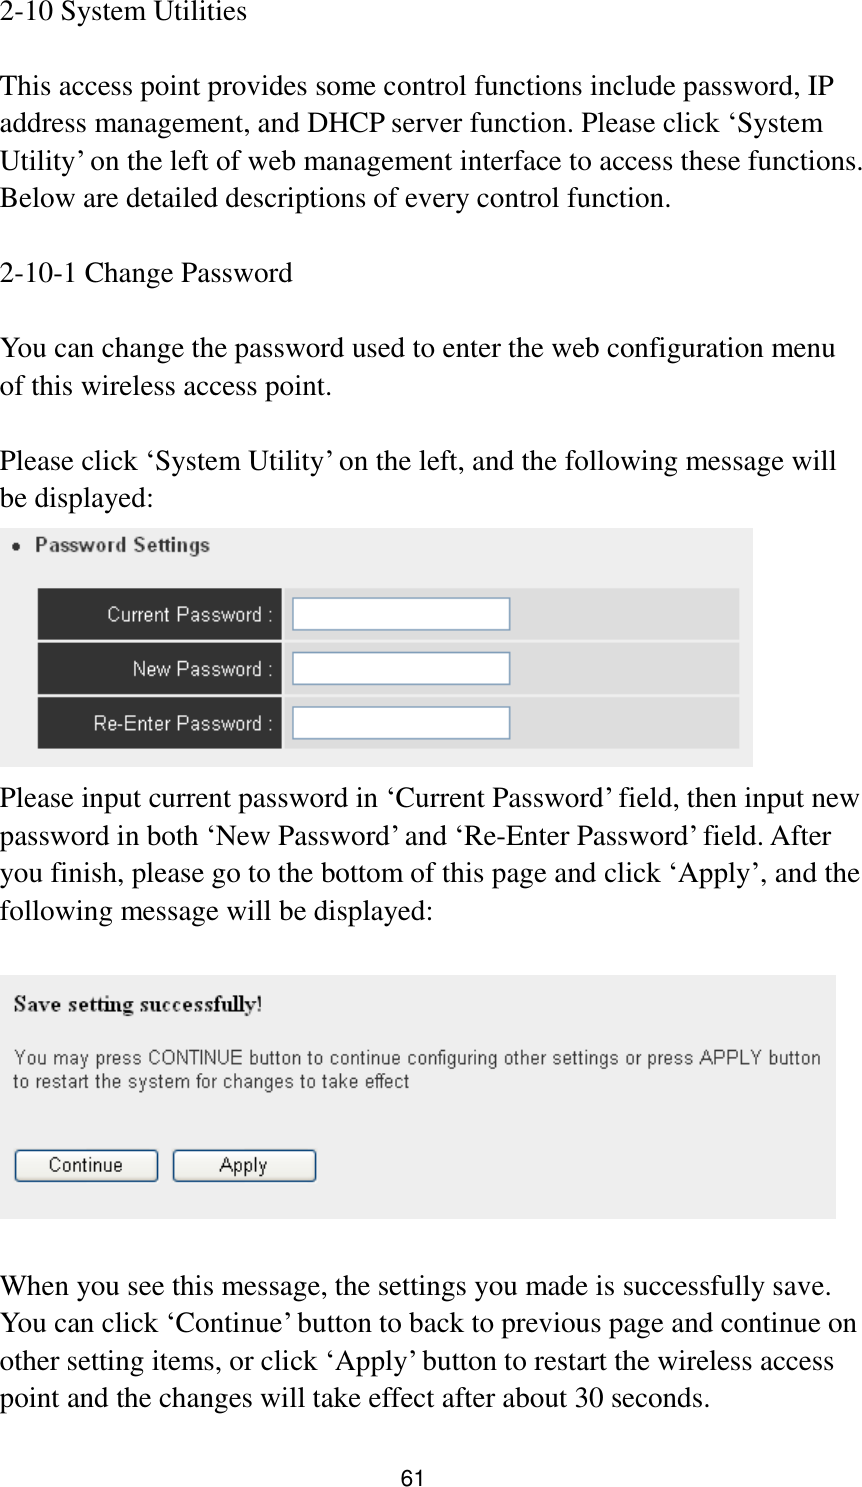 61 2-10 System Utilities  This access point provides some control functions include password, IP address management, and DHCP server function. Please click „System Utility‟ on the left of web management interface to access these functions. Below are detailed descriptions of every control function.  2-10-1 Change Password  You can change the password used to enter the web configuration menu of this wireless access point.    Please click „System Utility‟ on the left, and the following message will be displayed:  Please input current password in „Current Password‟ field, then input new password in both „New Password‟ and „Re-Enter Password‟ field. After you finish, please go to the bottom of this page and click „Apply‟, and the following message will be displayed:    When you see this message, the settings you made is successfully save. You can click „Continue‟ button to back to previous page and continue on other setting items, or click „Apply‟ button to restart the wireless access point and the changes will take effect after about 30 seconds. 